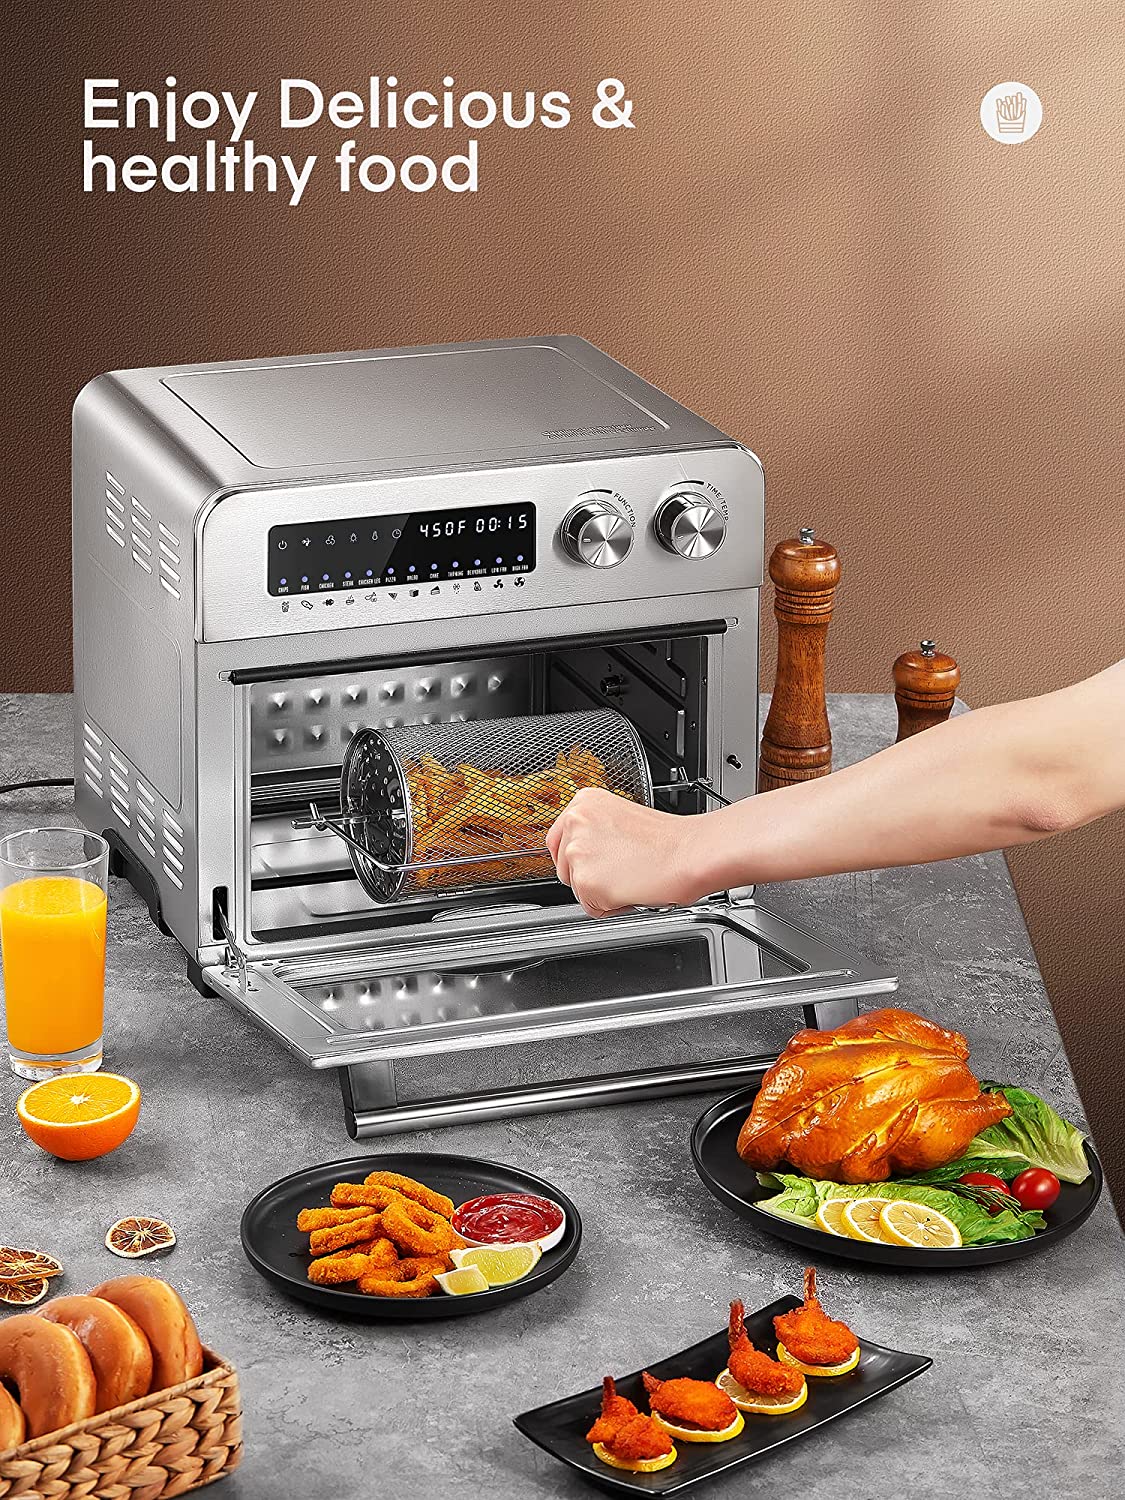 AICOOK Air Fryer Oven 24 QT, 12-in-1 Air Fryer 1700W Digital Large Convection Oven with Rotisserie and Dehydrator for Chicken, French Fries and Pizza, Air fryer Toaster Oven Include 8 Accessories, Healthy Food, Healthy Life